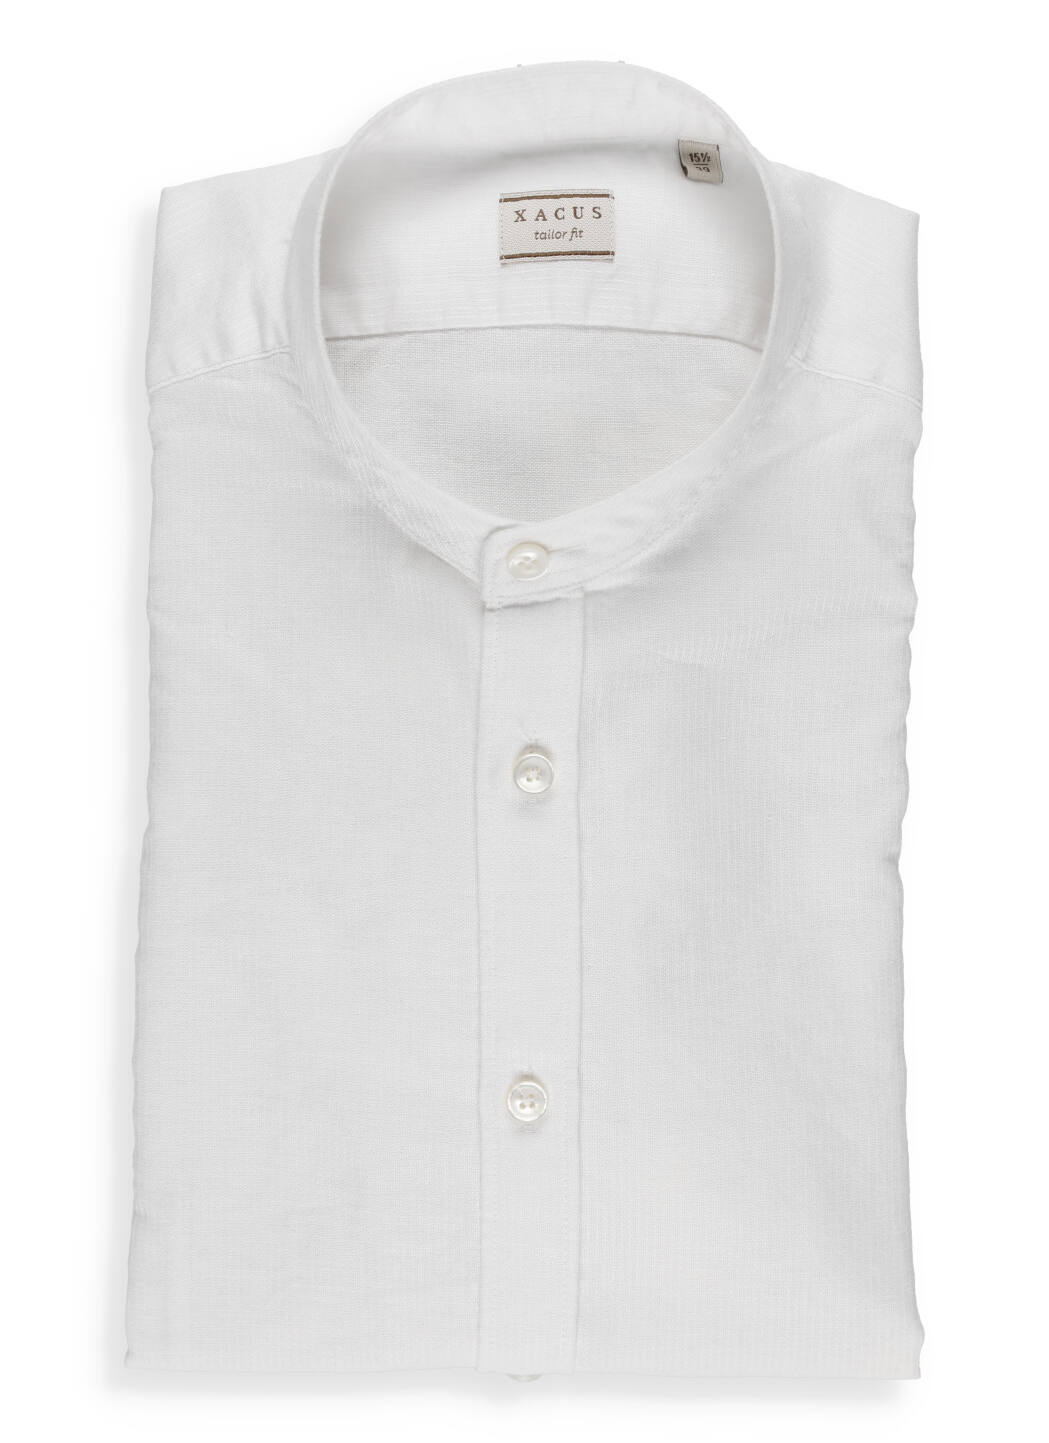 Xacus Casual Cotton And Linen Shirt